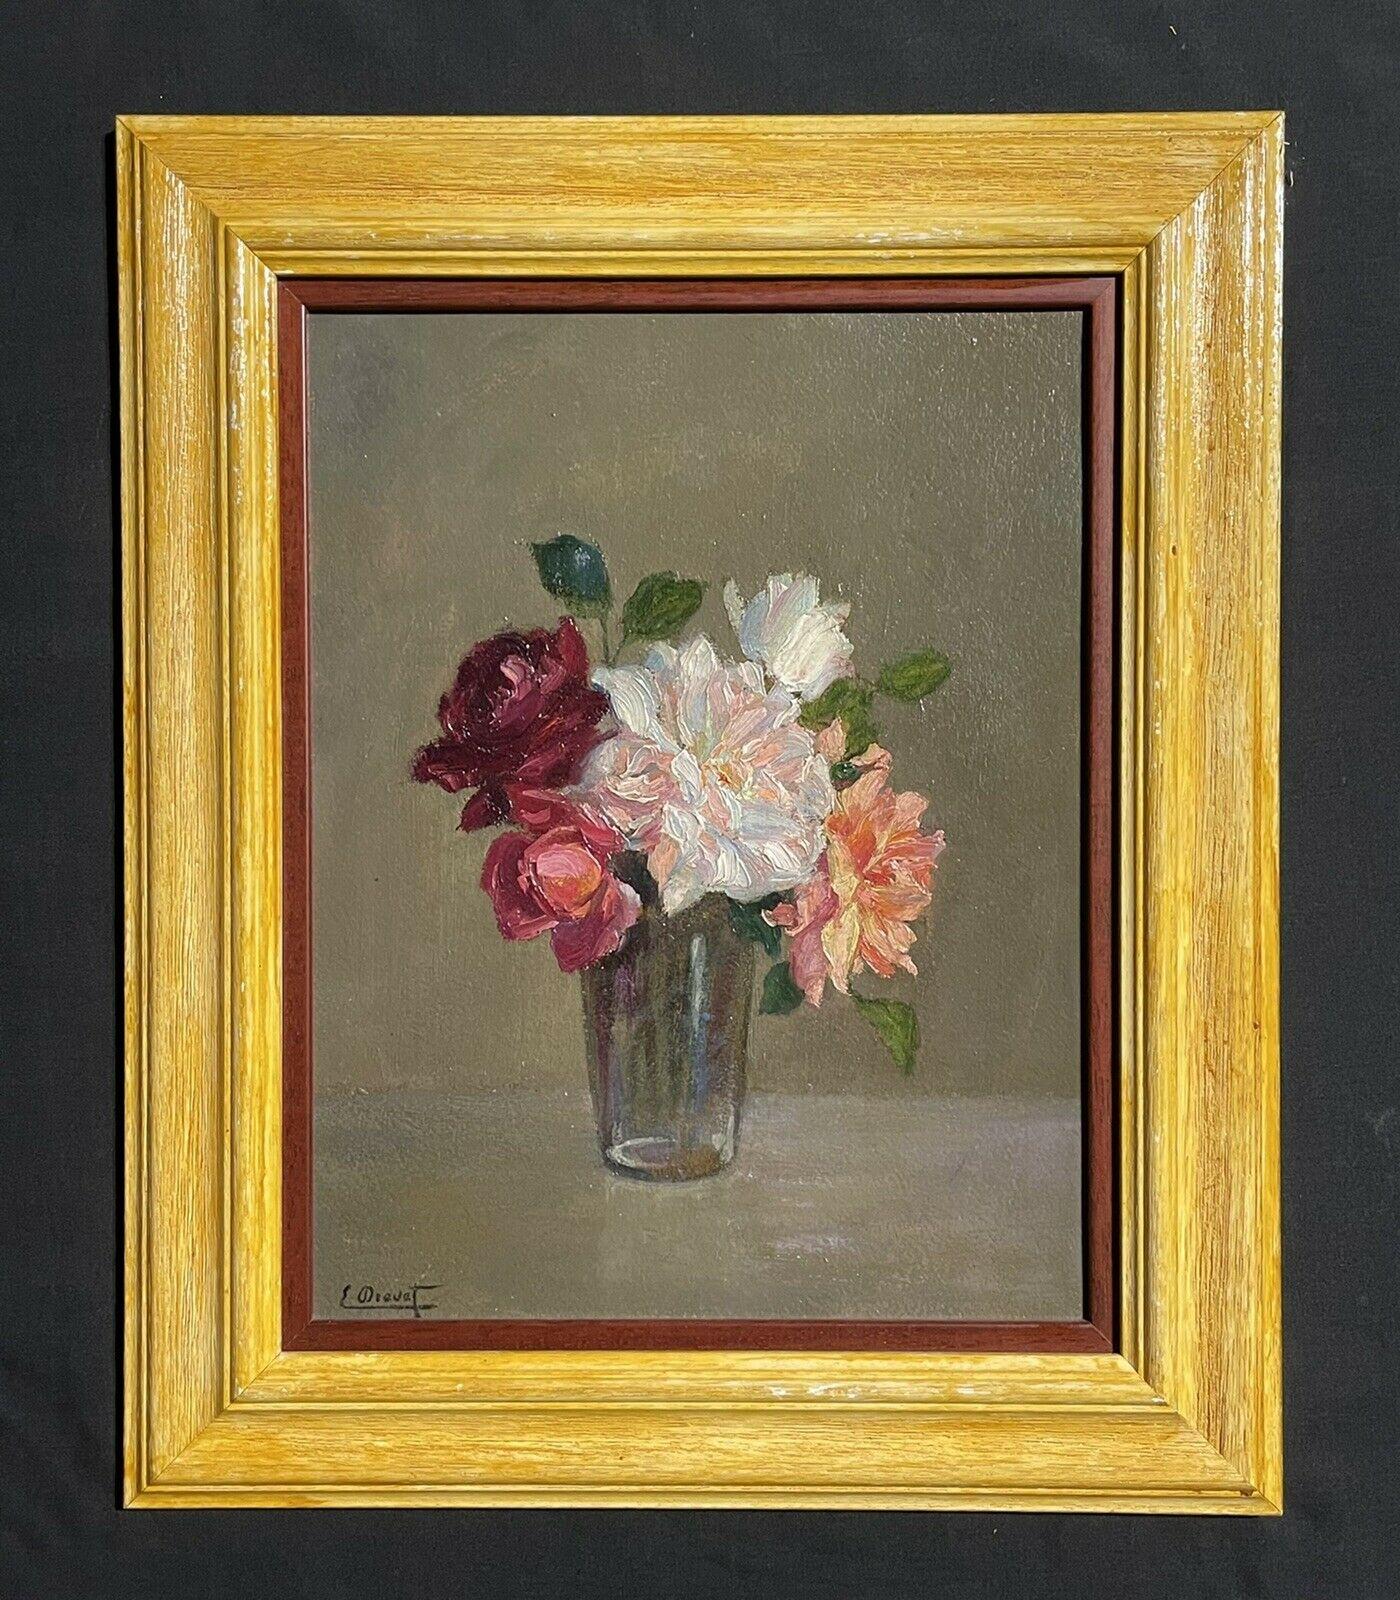 SIGNED FRENCH VINTAGE OIL PAINTING - STILL LIFE ROSES IN GLASS VASE - Painting by Unknown